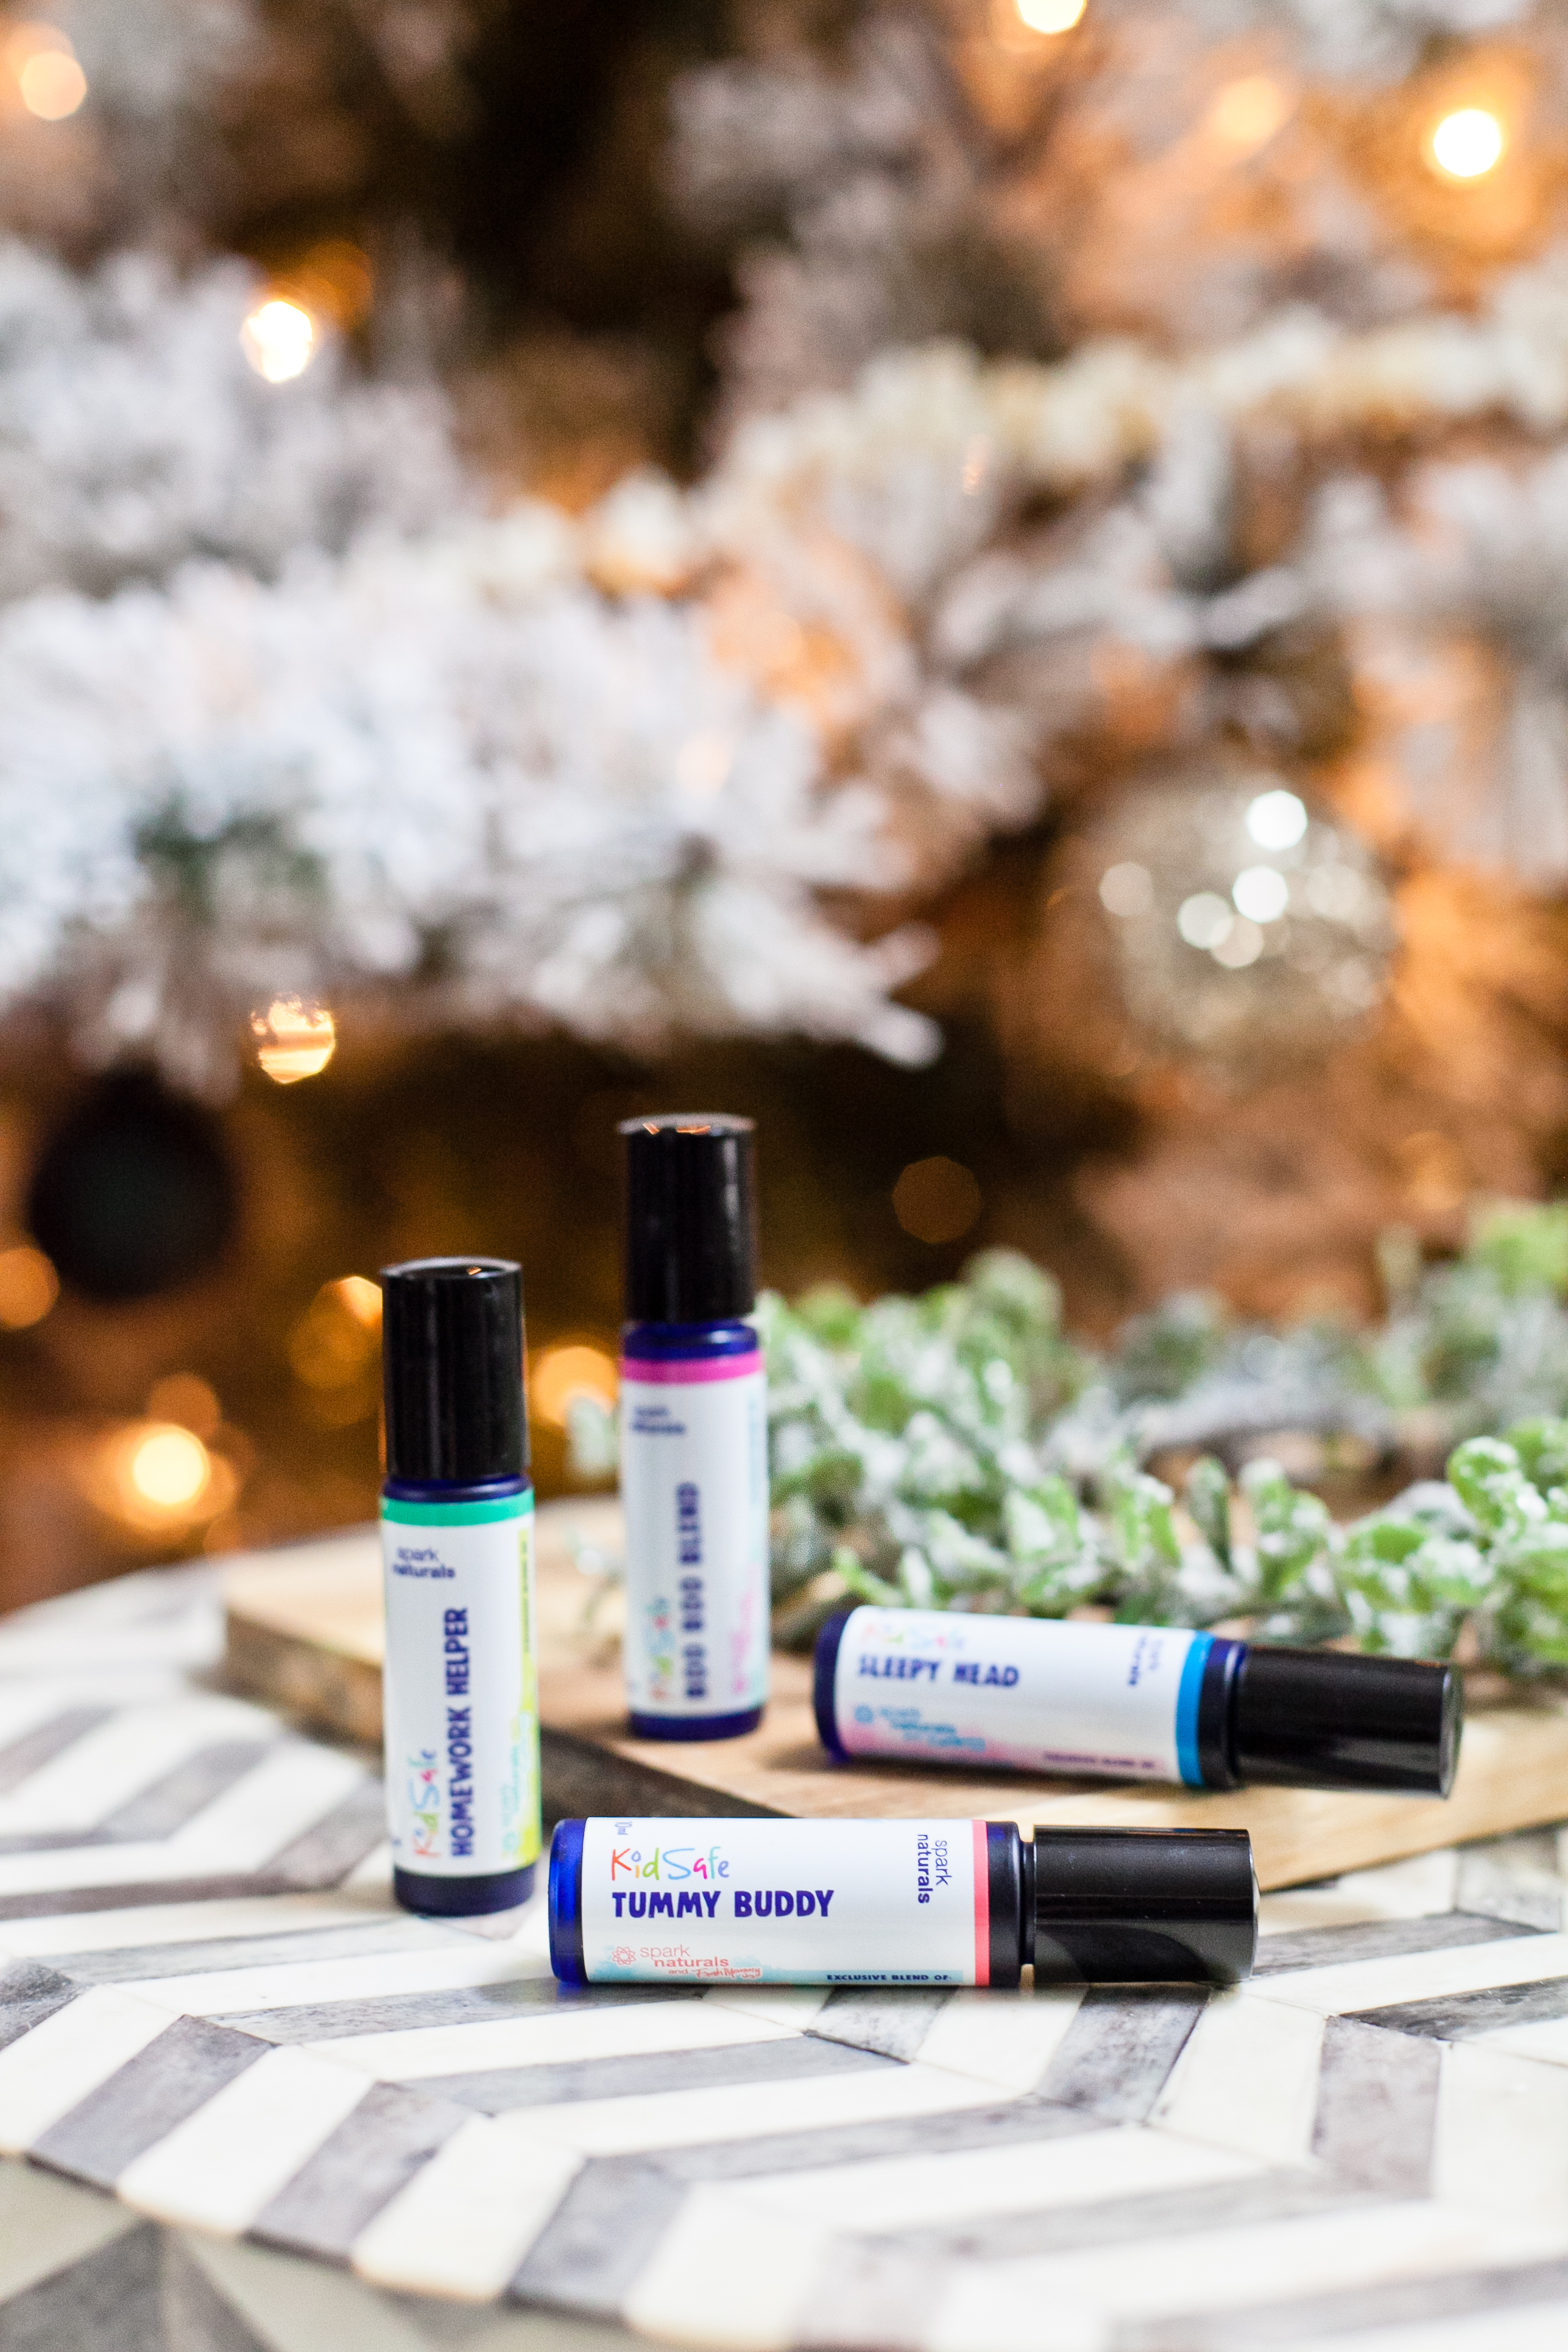 KID SAFE, ready to use and apply essential oil blends for kids. Build up your natural medicine cabinet with these four blends from popular Florida lifestyle blogger Tabitha Blue of Fresh Mommy Blog and Spark Naturals pure essential oils!